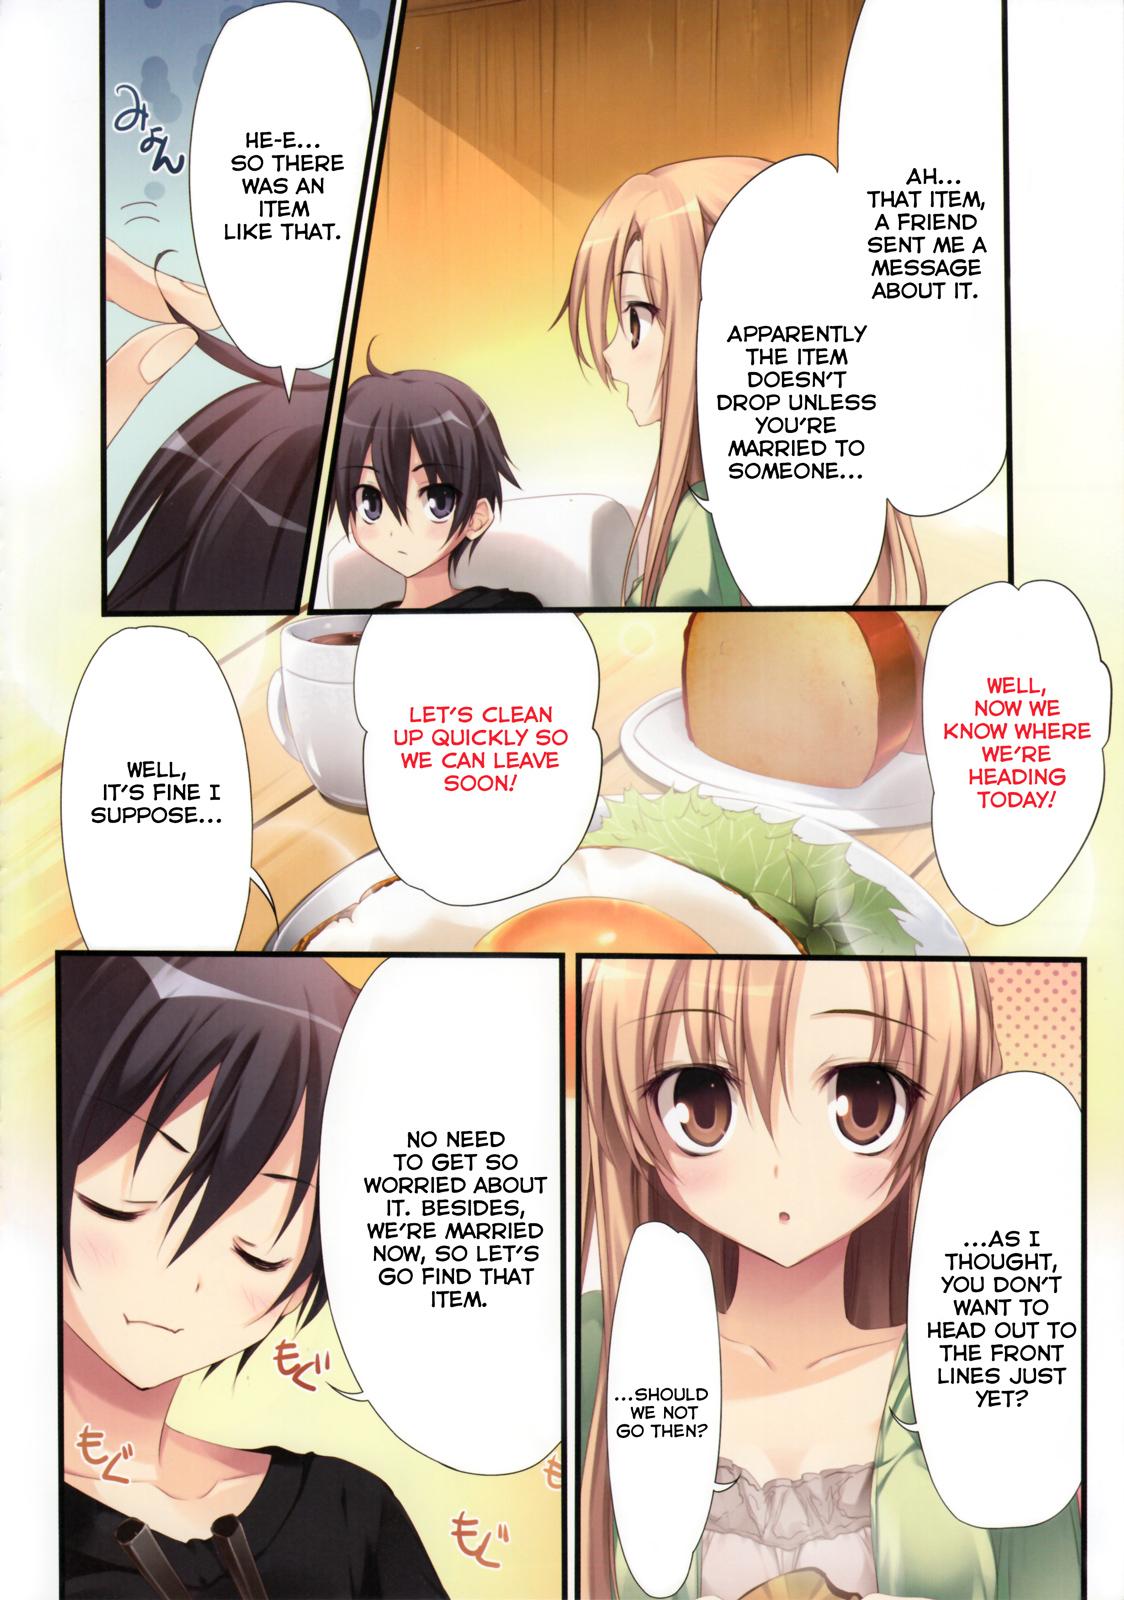 Role Play KAROFUL MIX EX8 - Sword art online Rough - Page 4